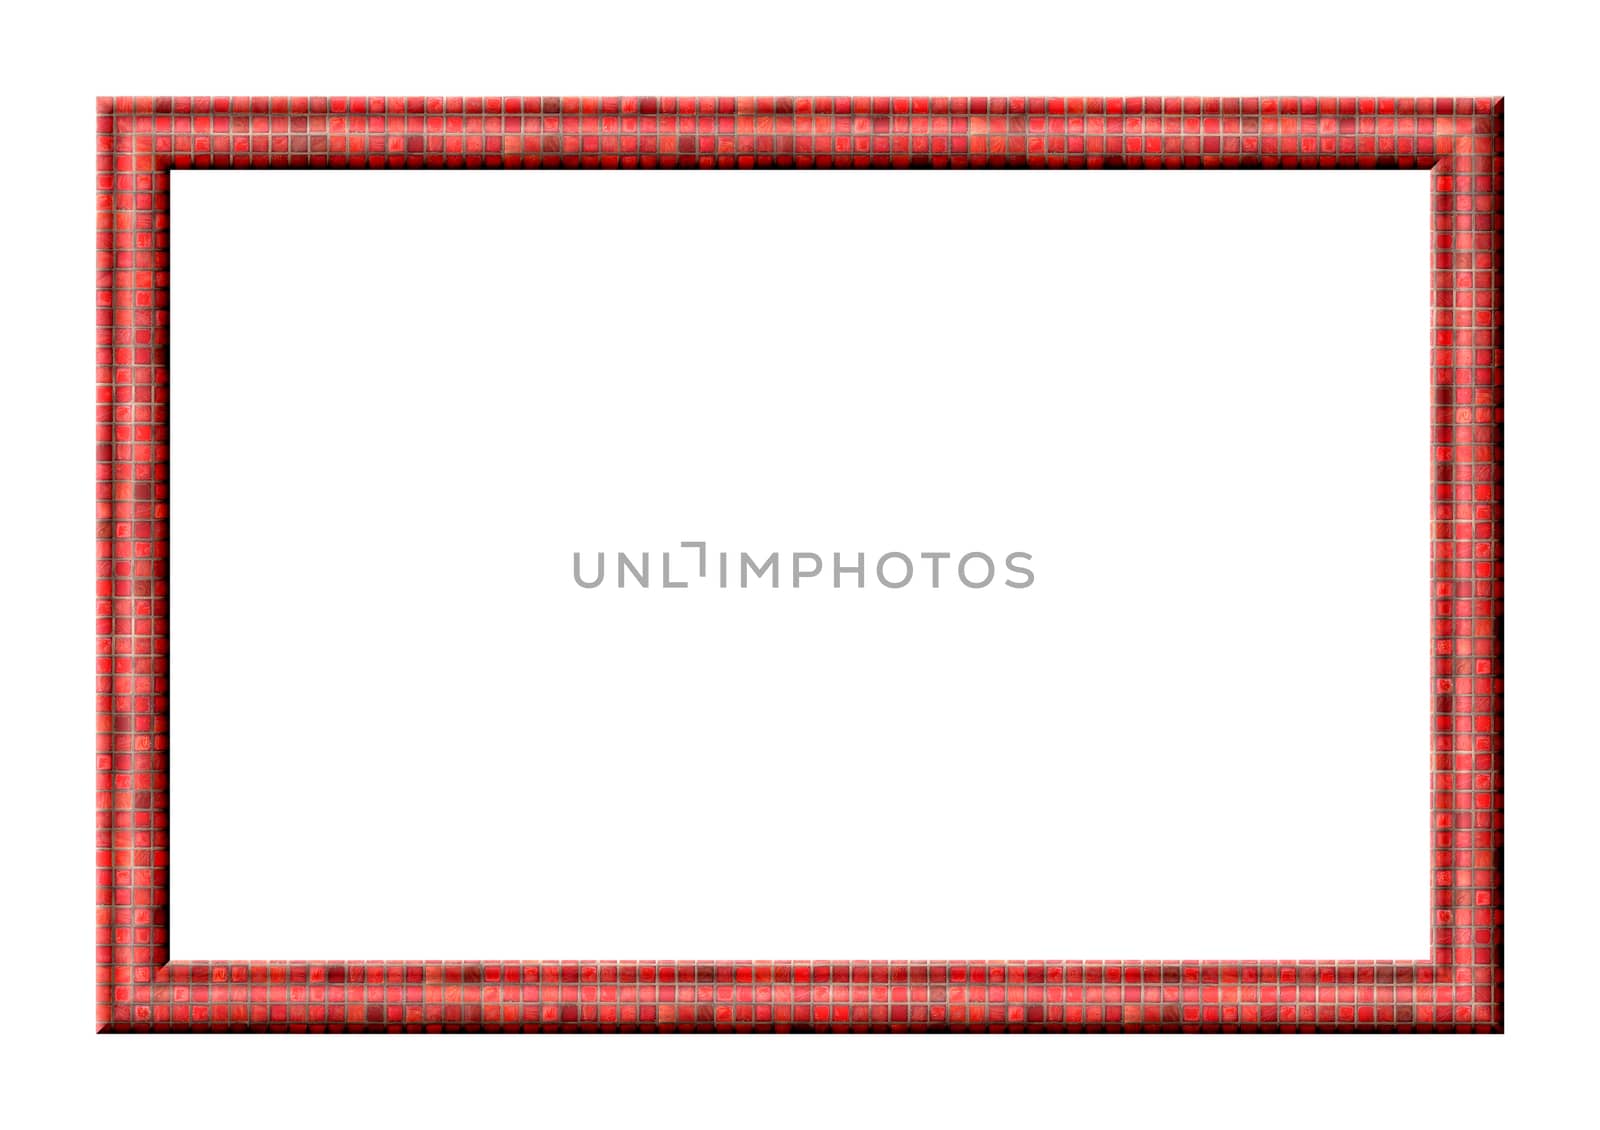 
Rectangular blank photo frame with red textured tiles on white background